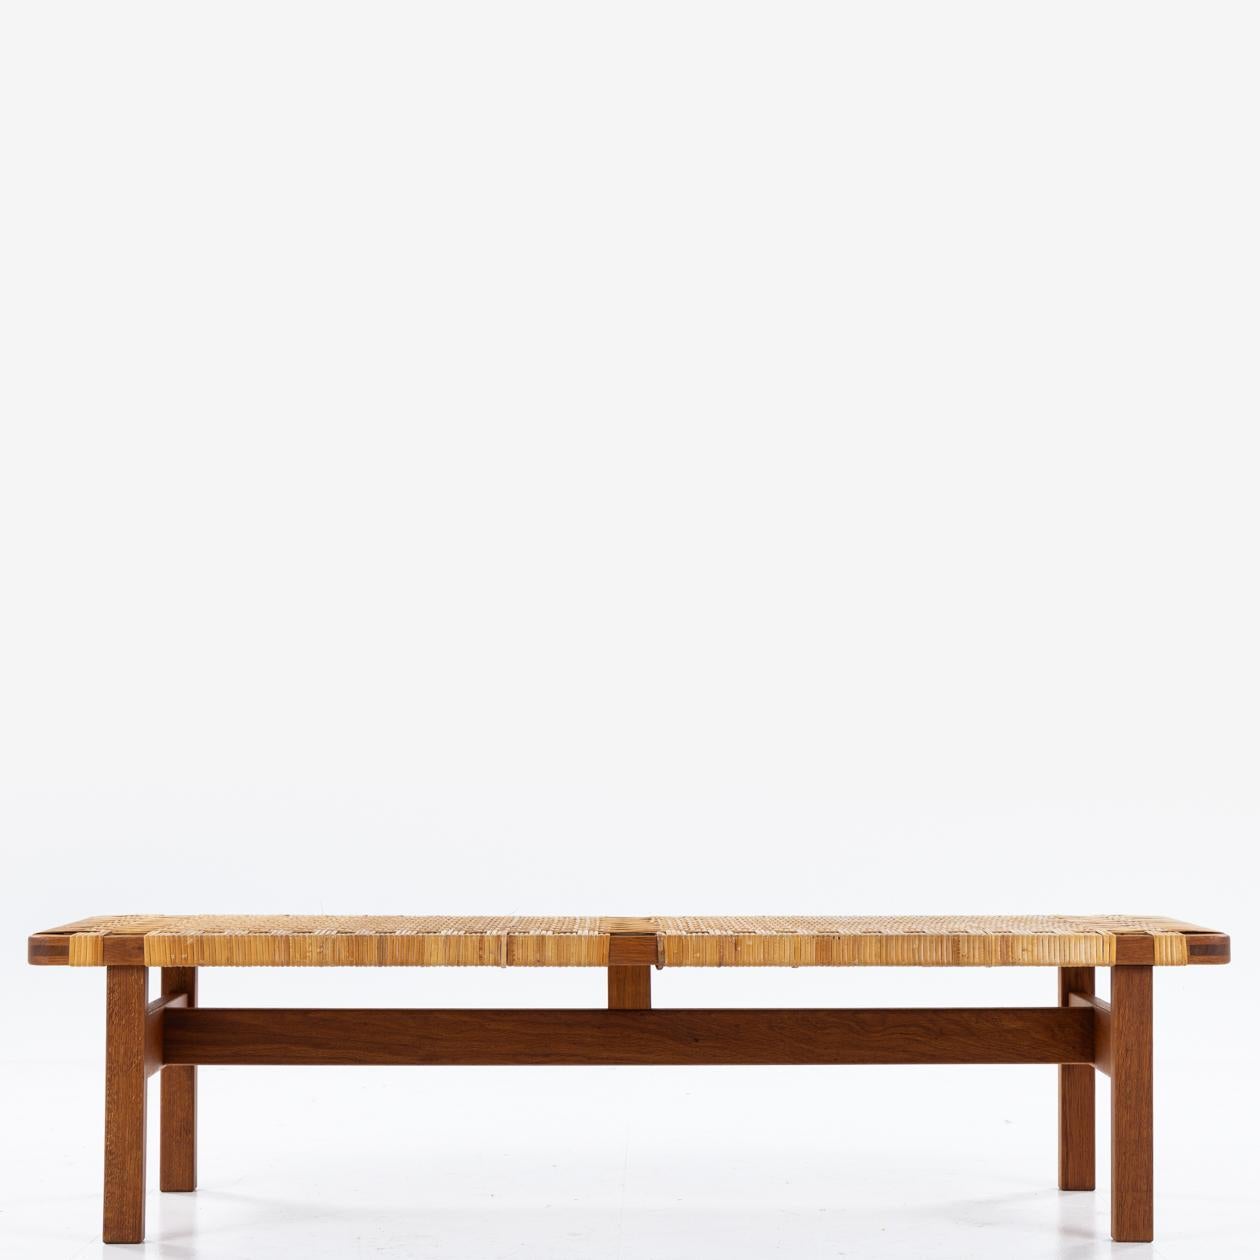 Cane BM 5272 bench / coffee table by Børge Mogensen